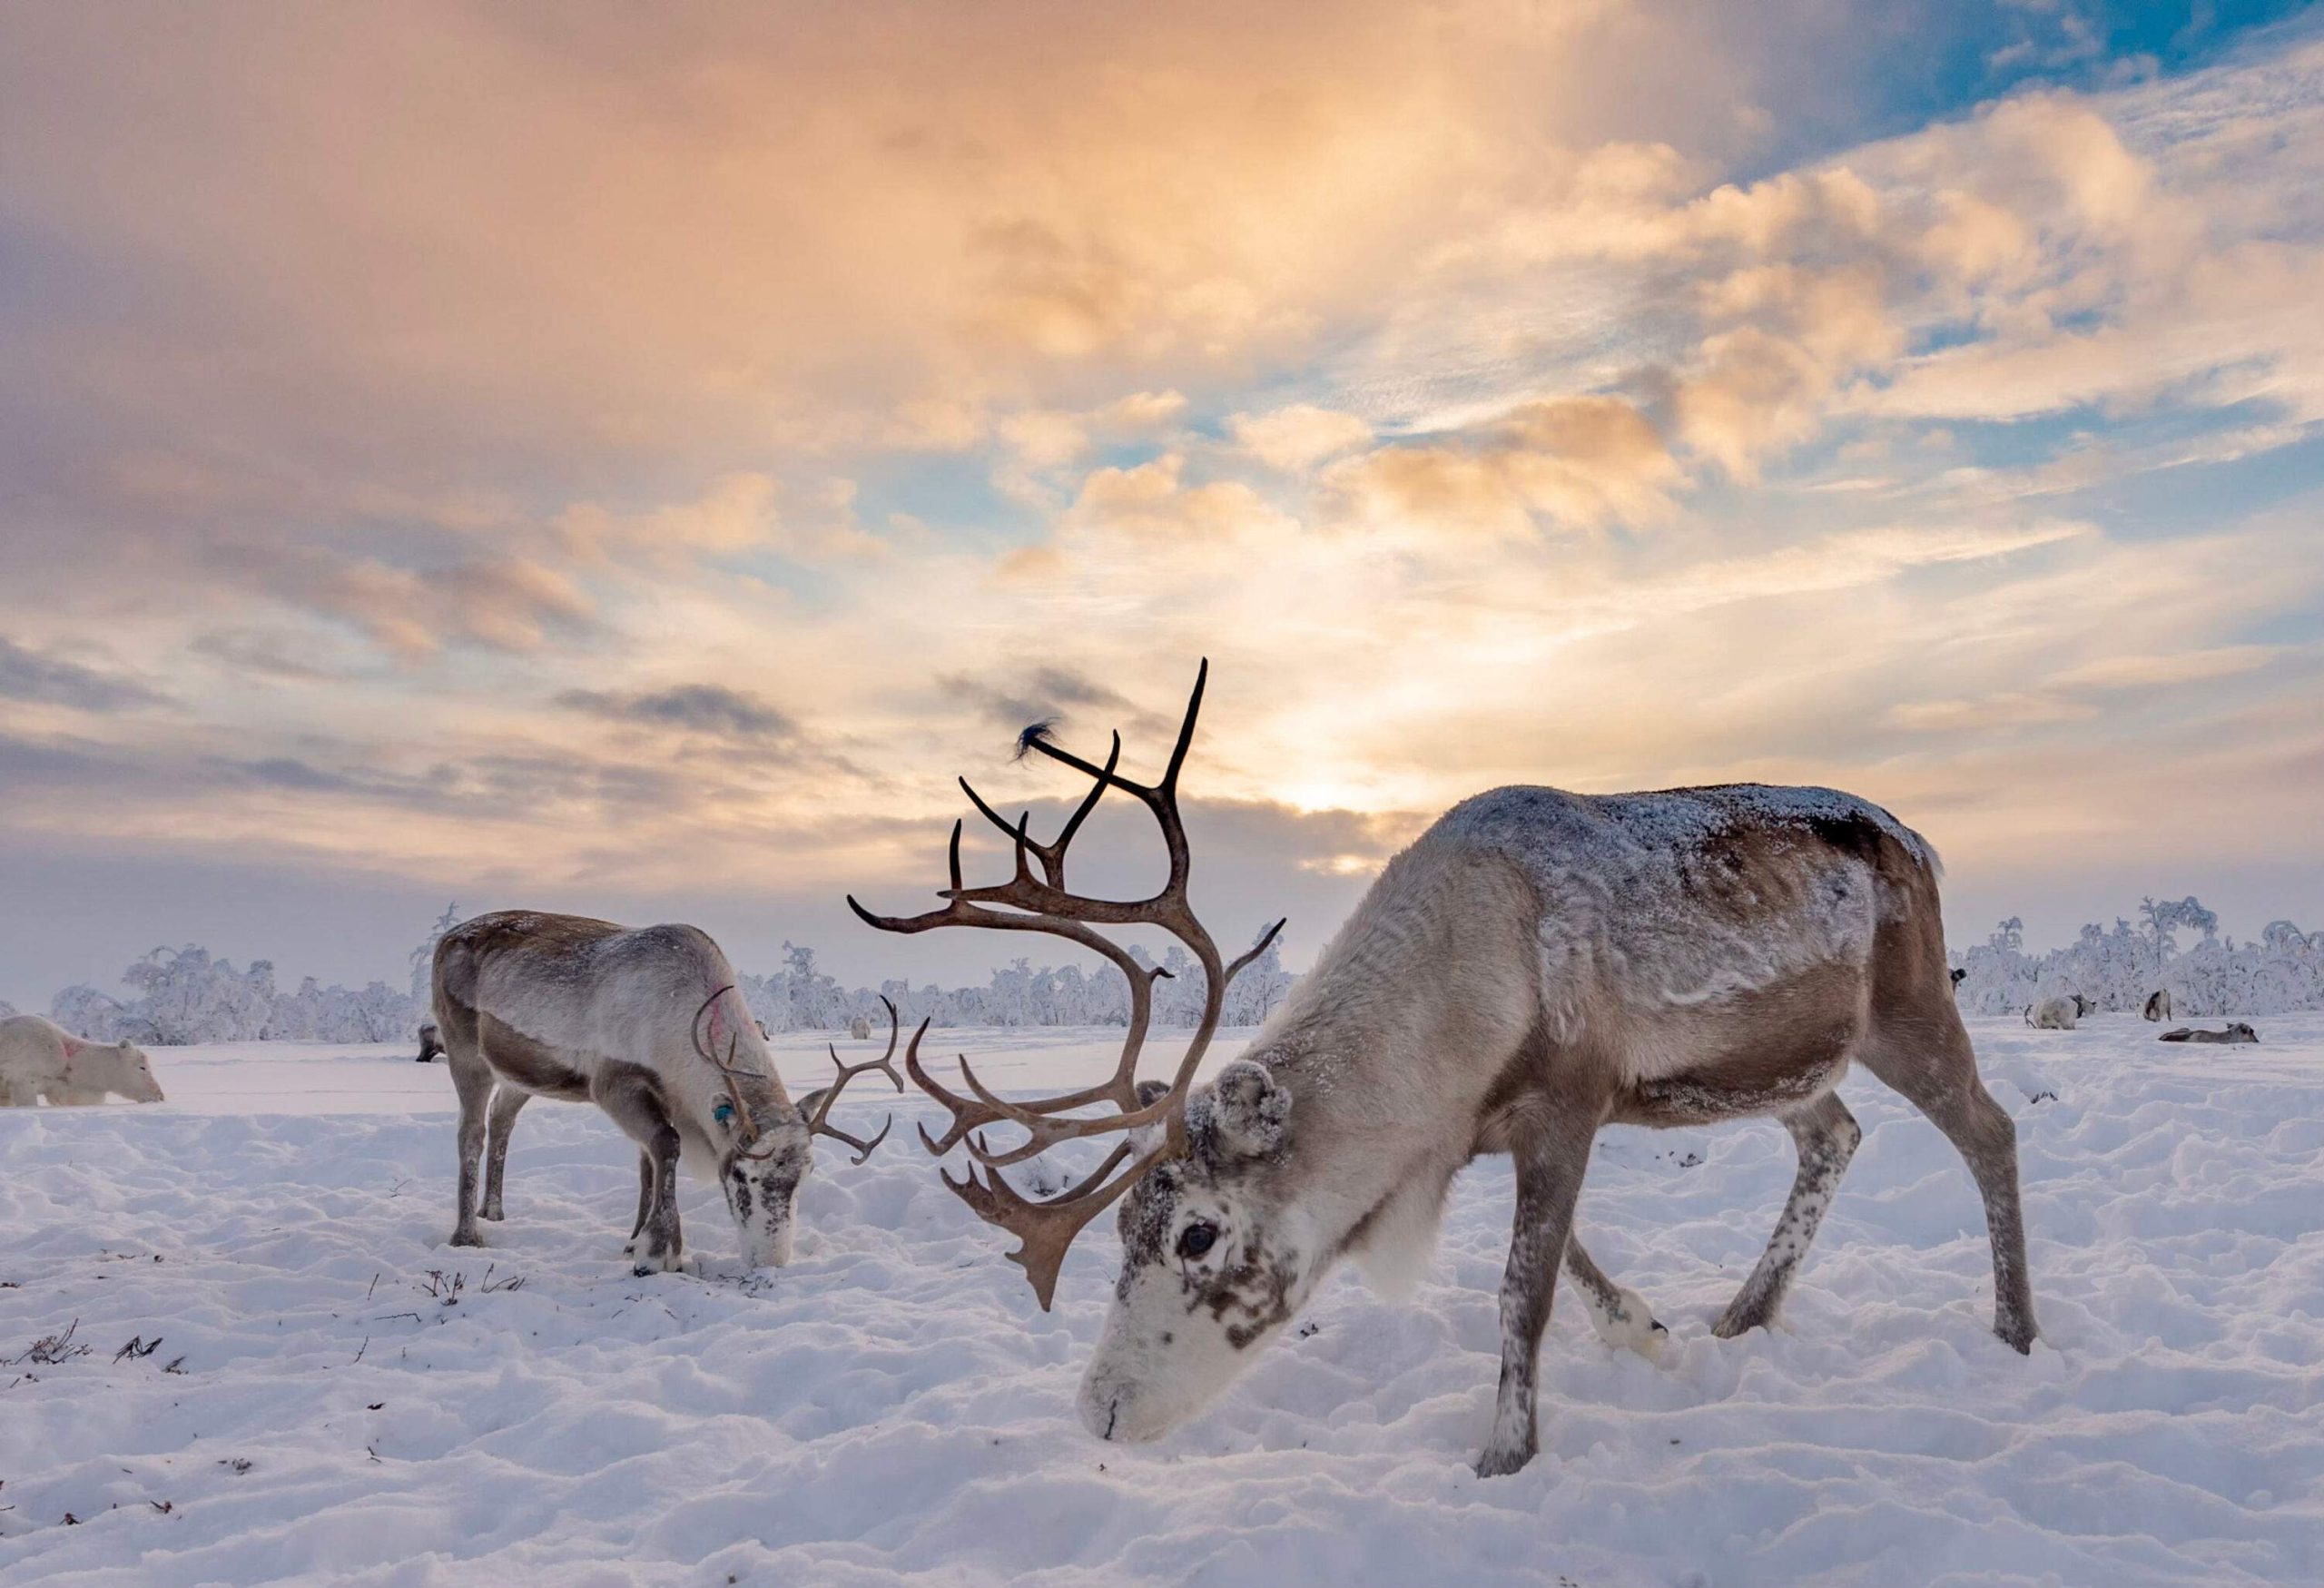 Two forest reindeer grazing on the thick snow covering the grounds with the sun peeking through the clouds.